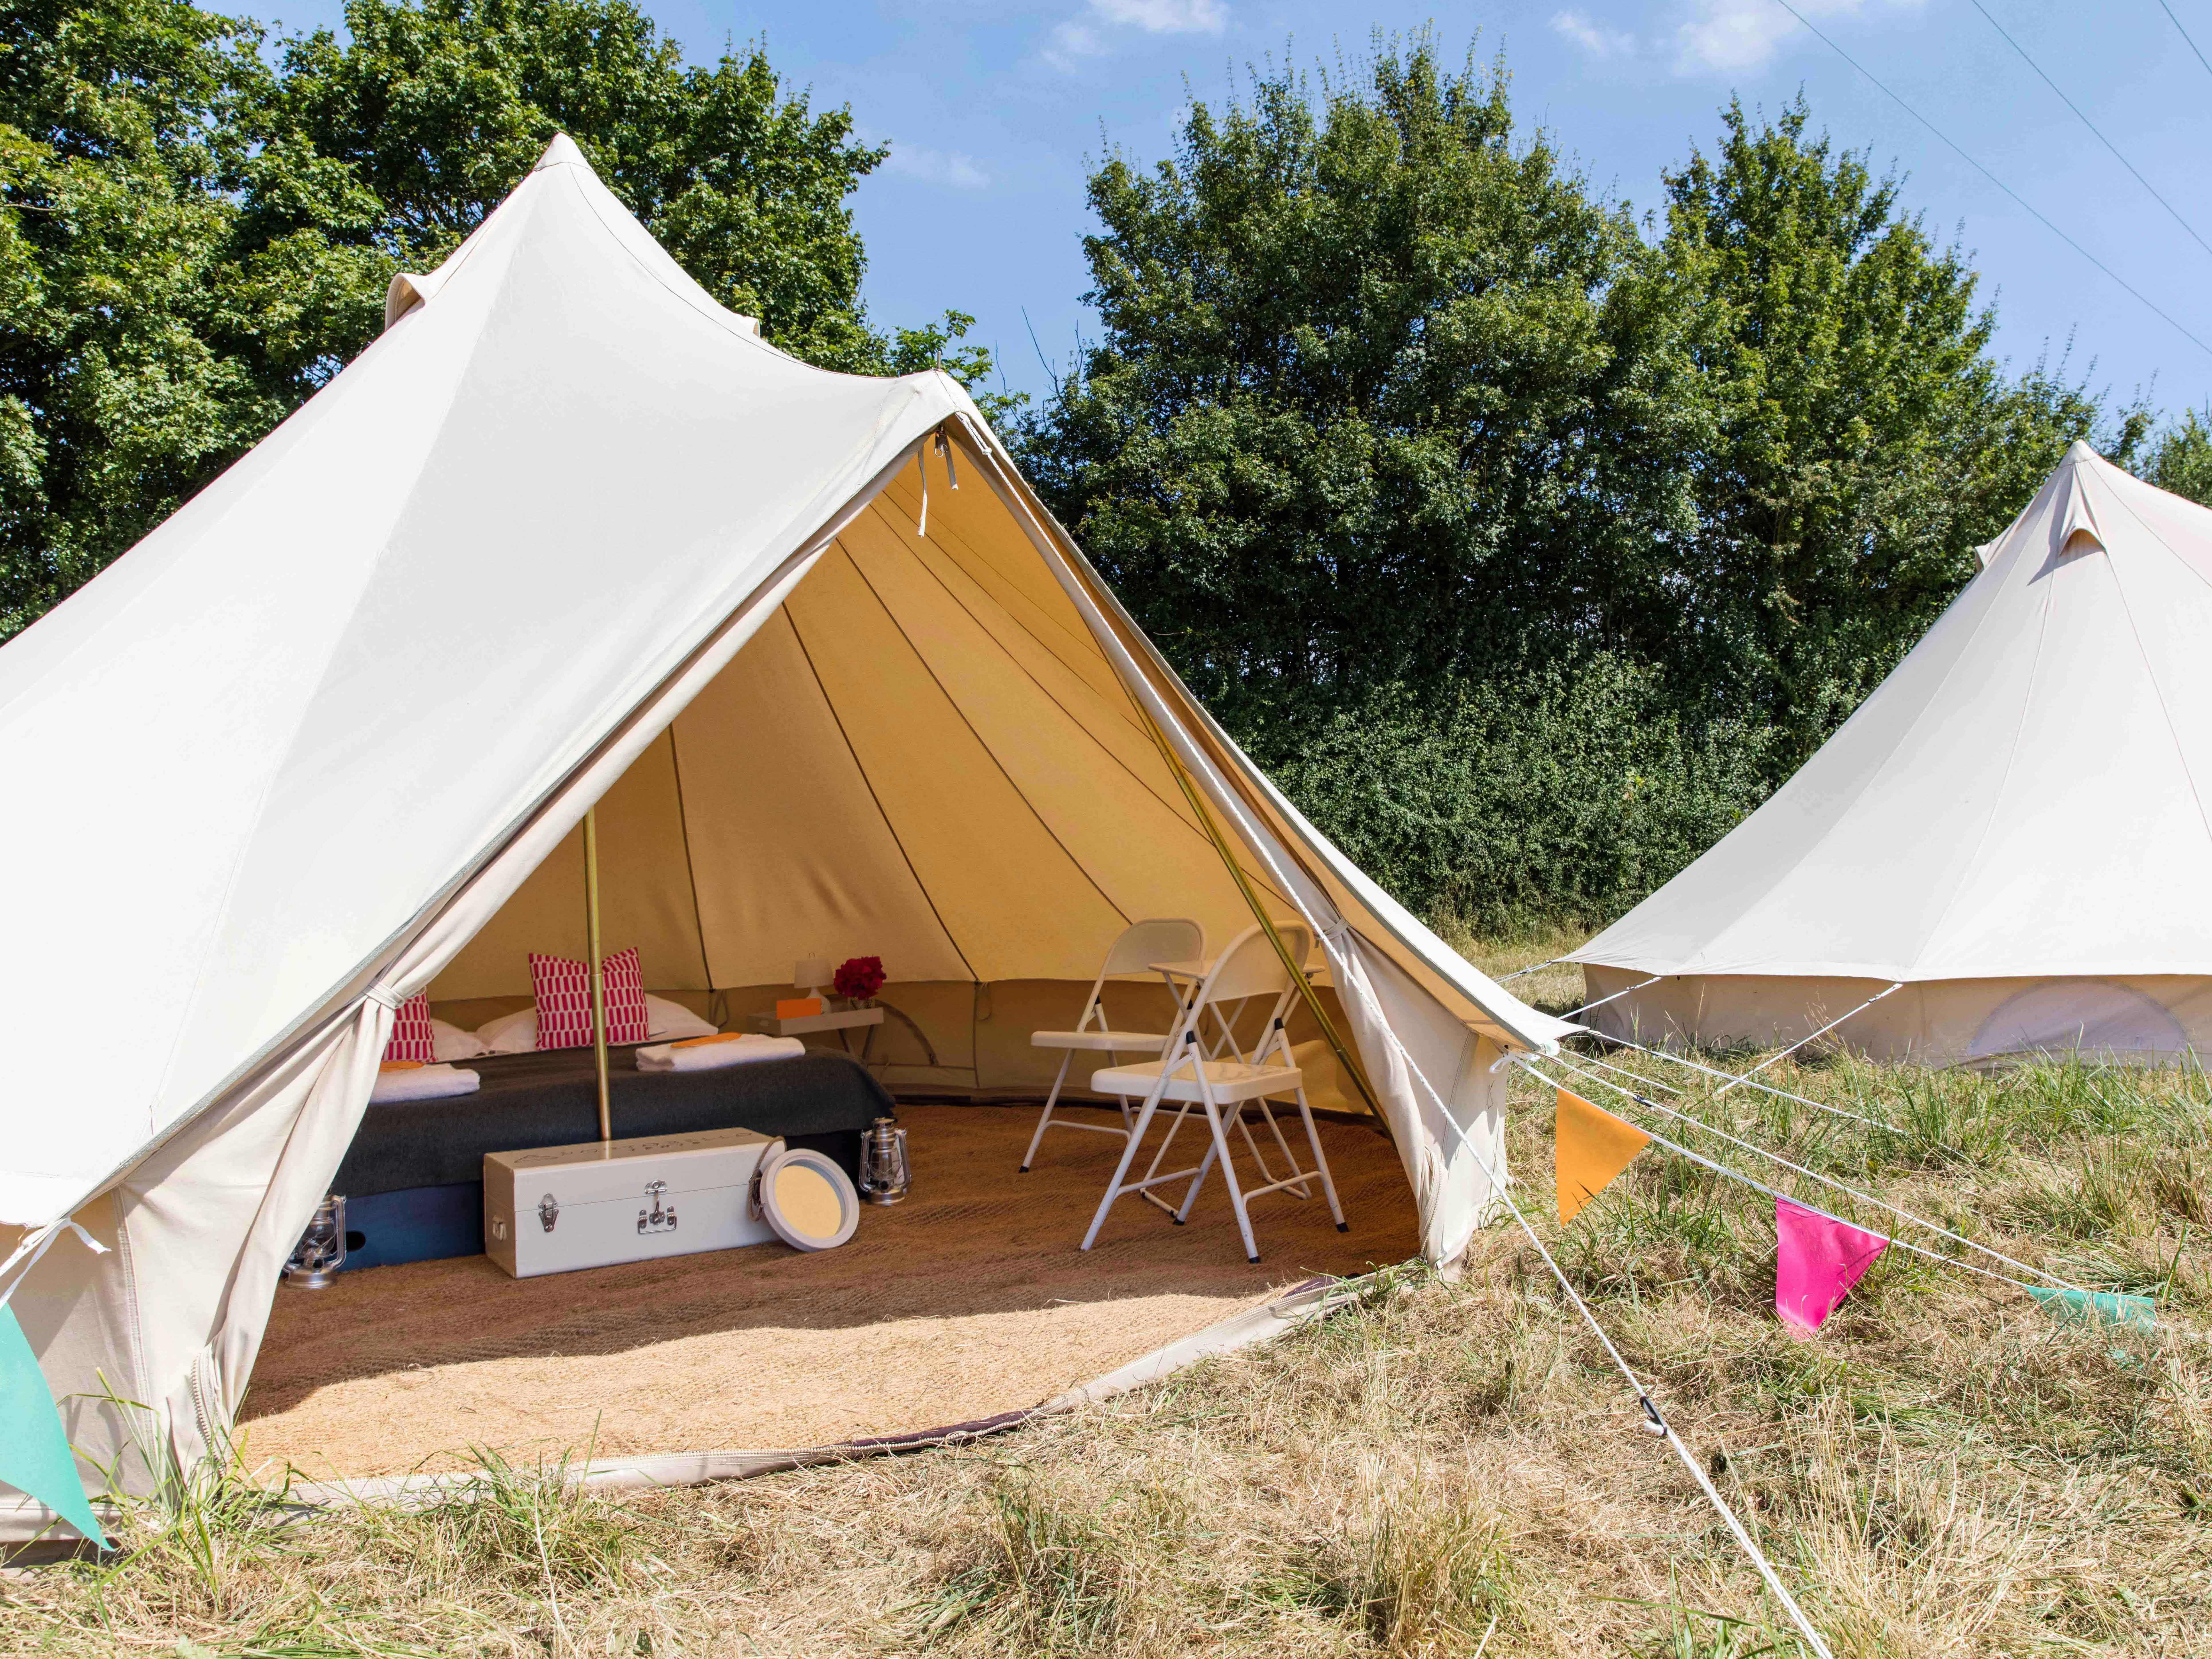 Great Dorset Steam Fair camping and glamping accommodation